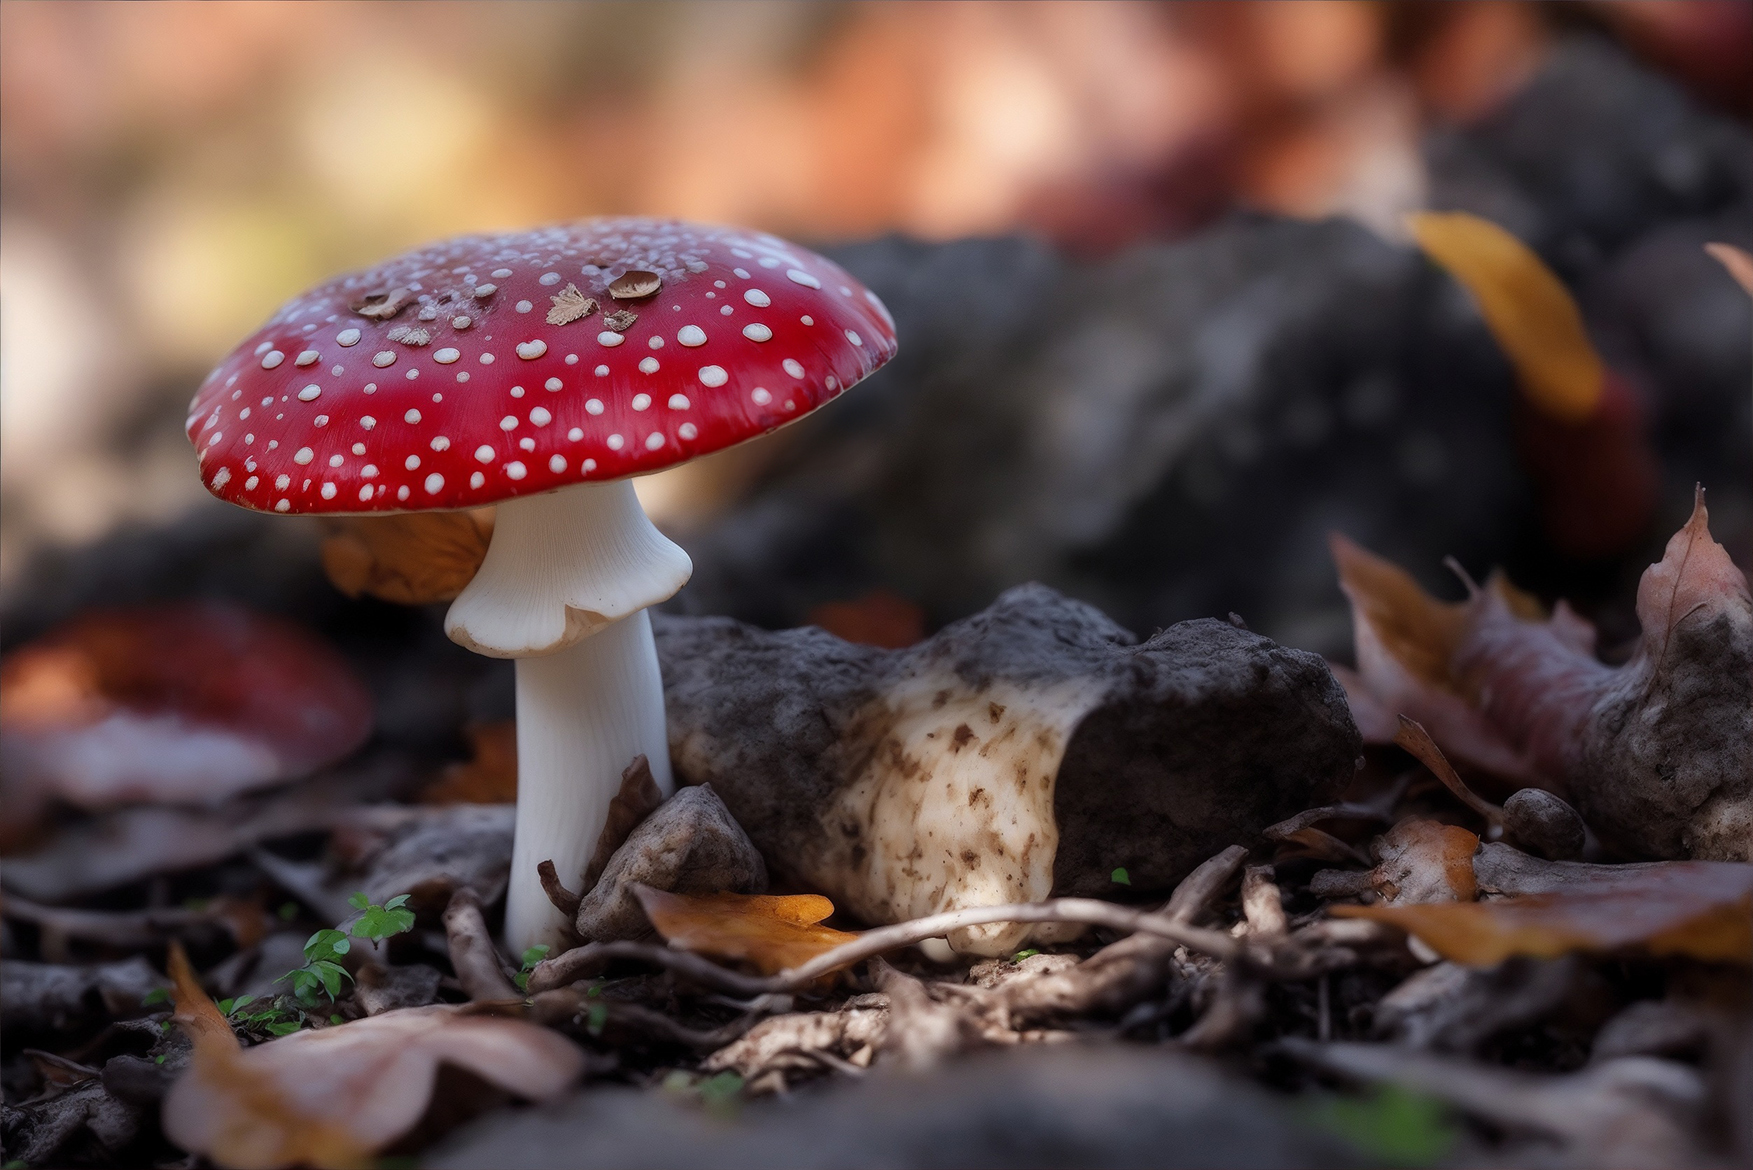 Image of a mushroom growing in the wild.